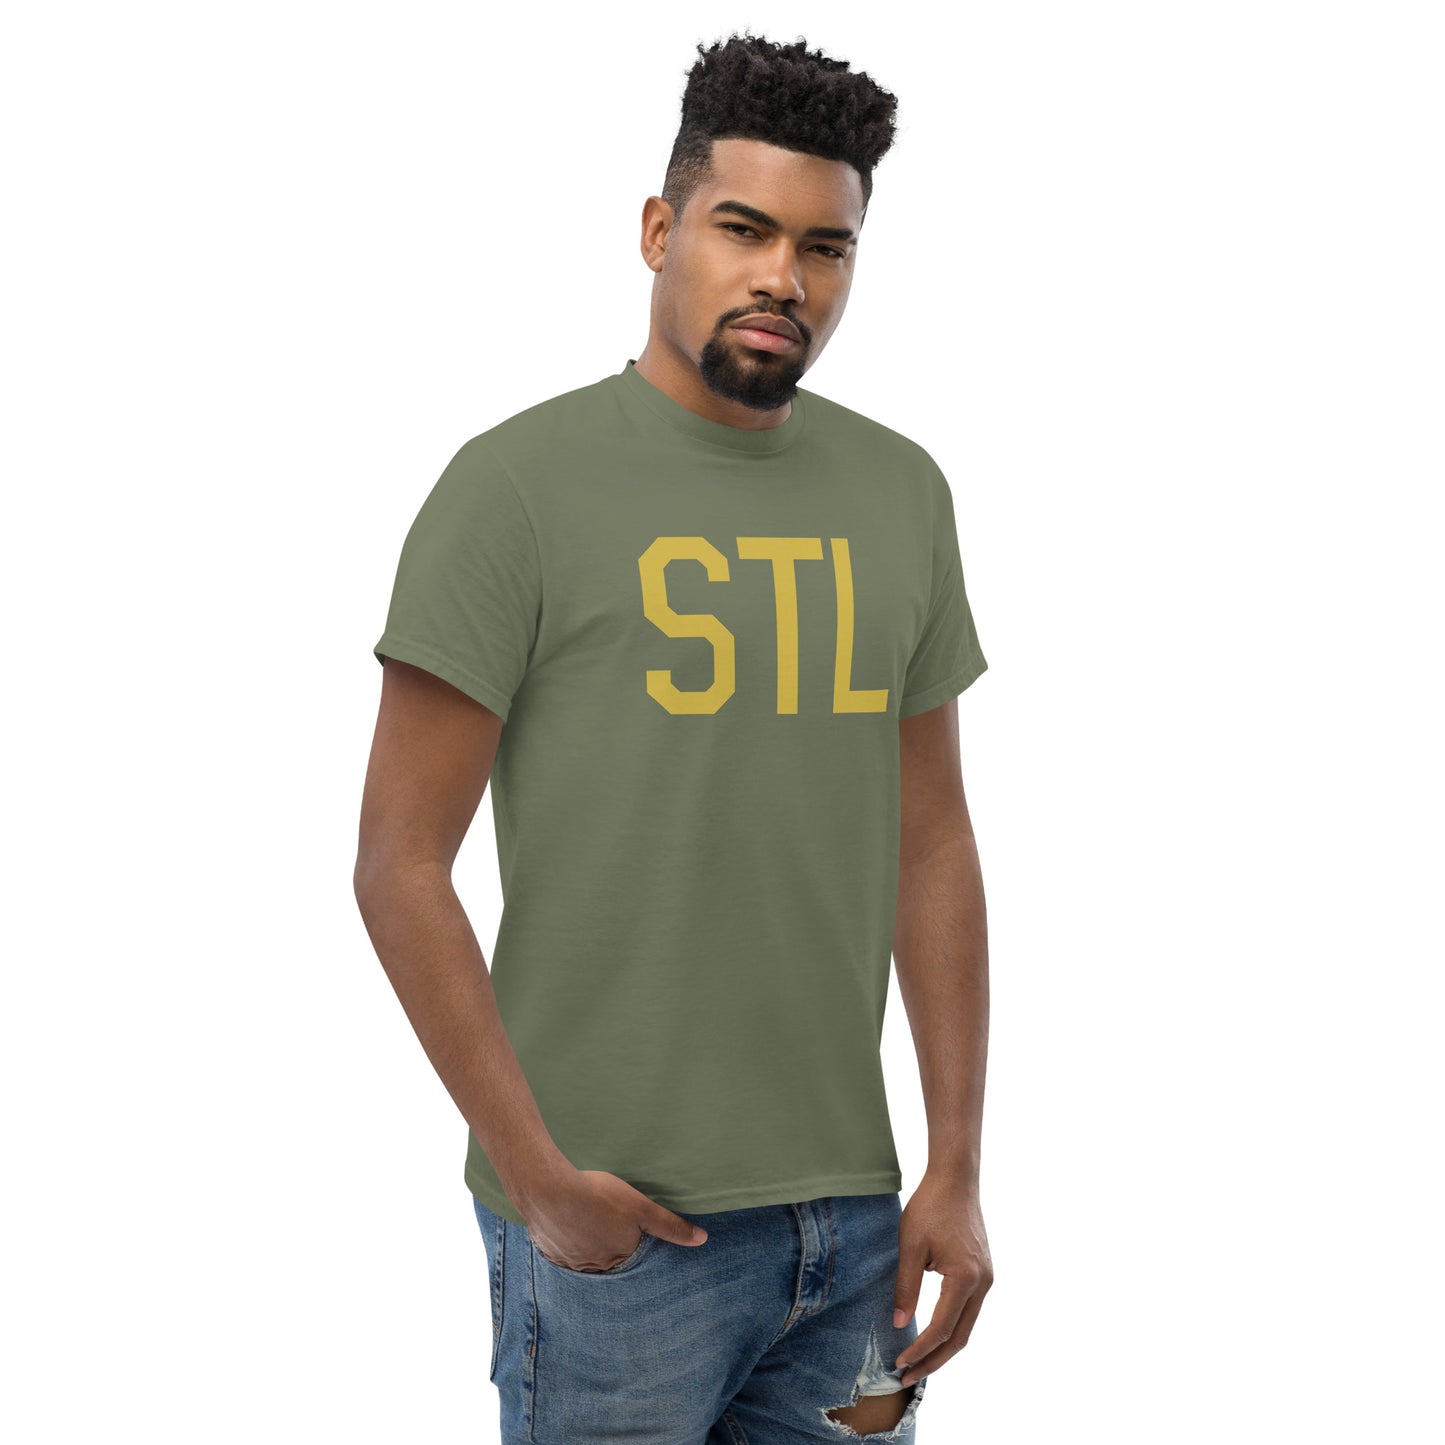 Aviation Enthusiast Men's Tee - Old Gold Graphic • STL St. Louis • YHM Designs - Image 08